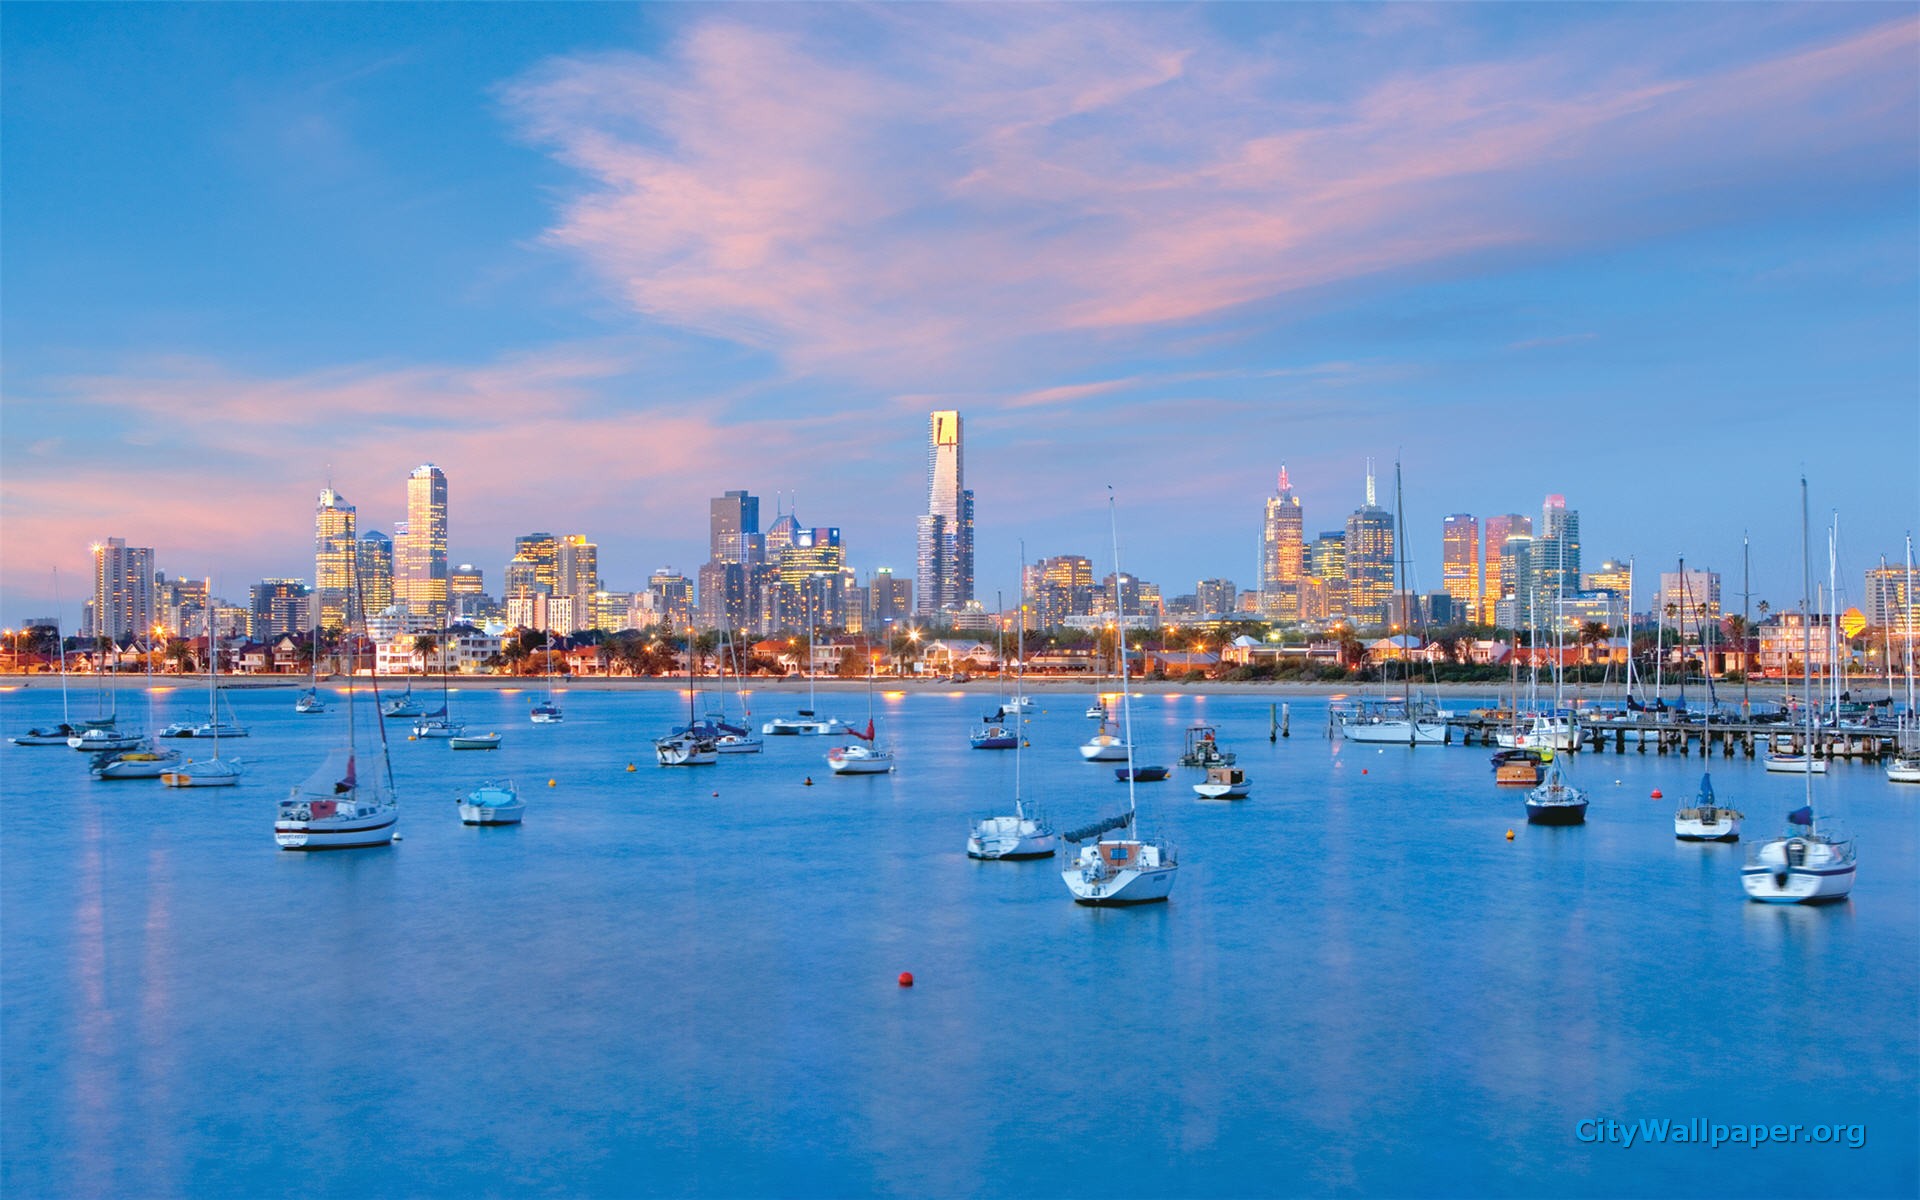 Wallpaper Melbourne - Wallpapers High Definition